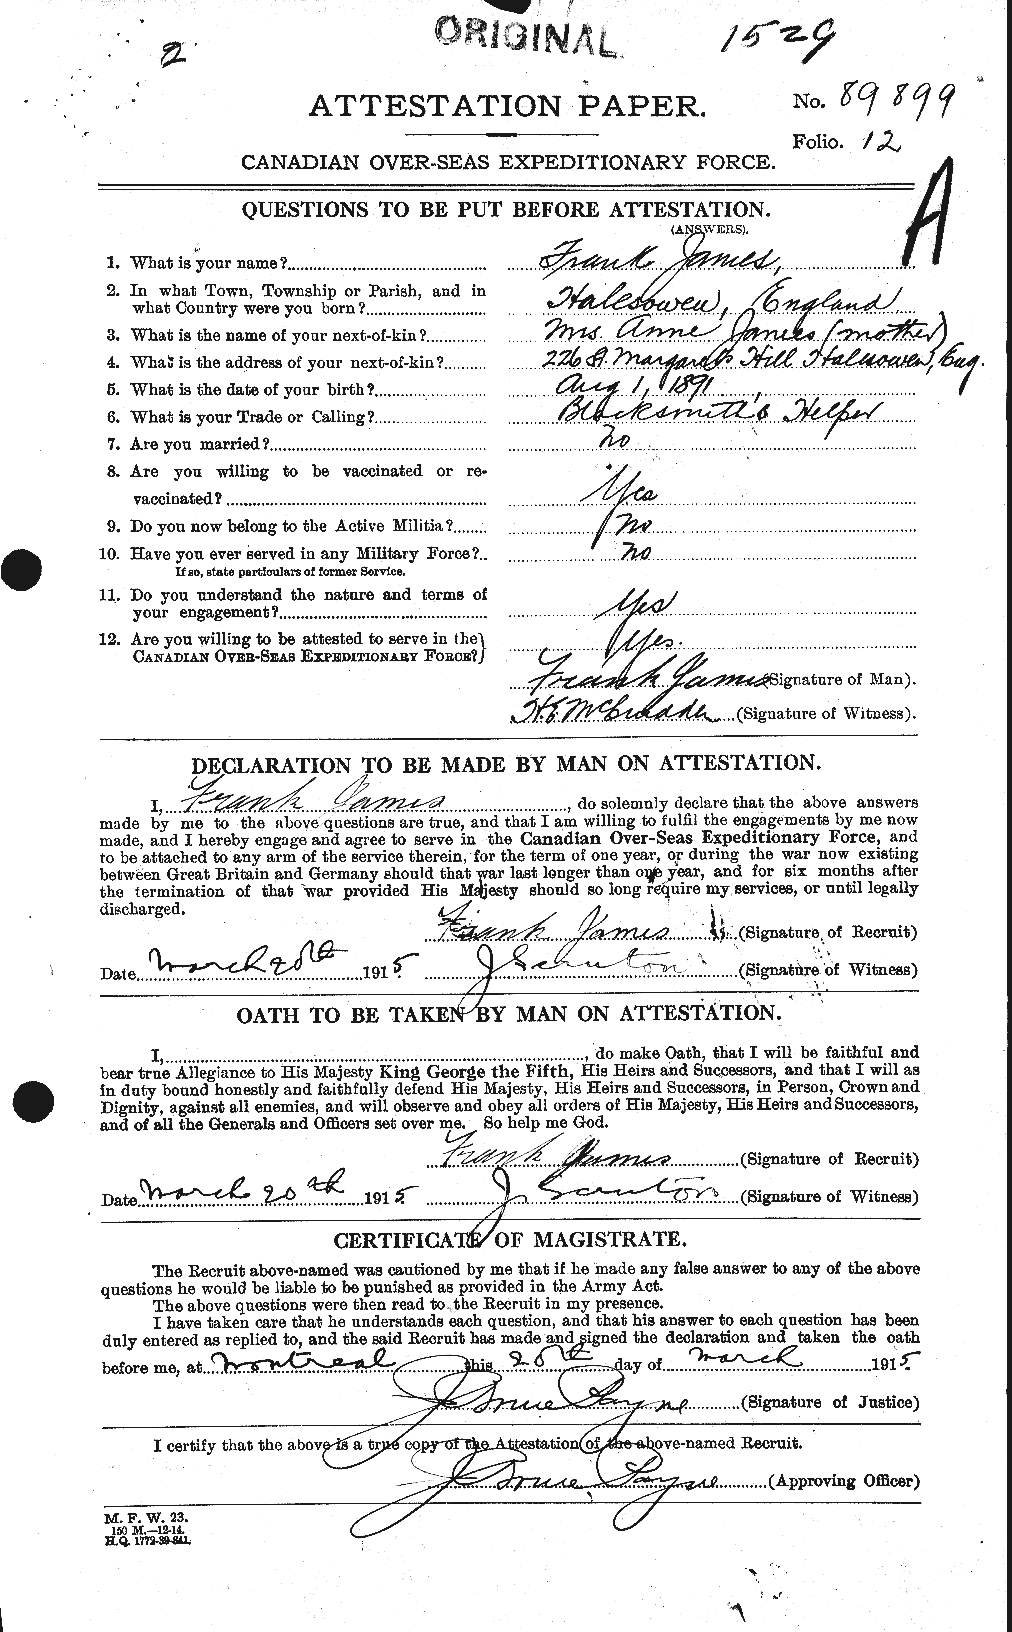 Personnel Records of the First World War - CEF 419338a